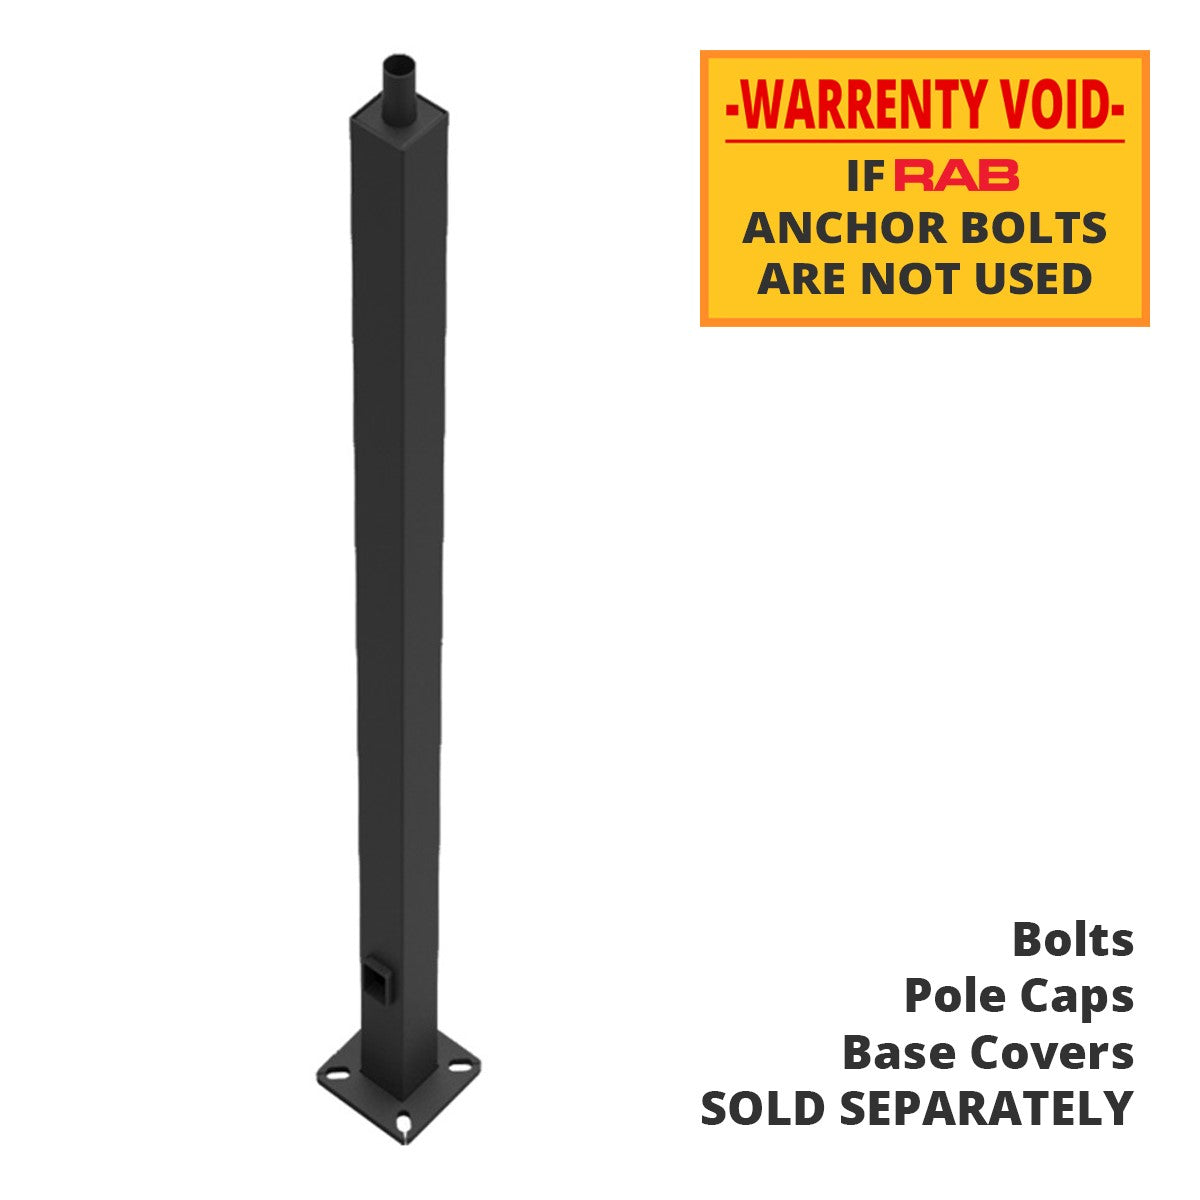 20 Ft Square Steel Tenon Top Pole 4 In. Shaft 11 Gauge